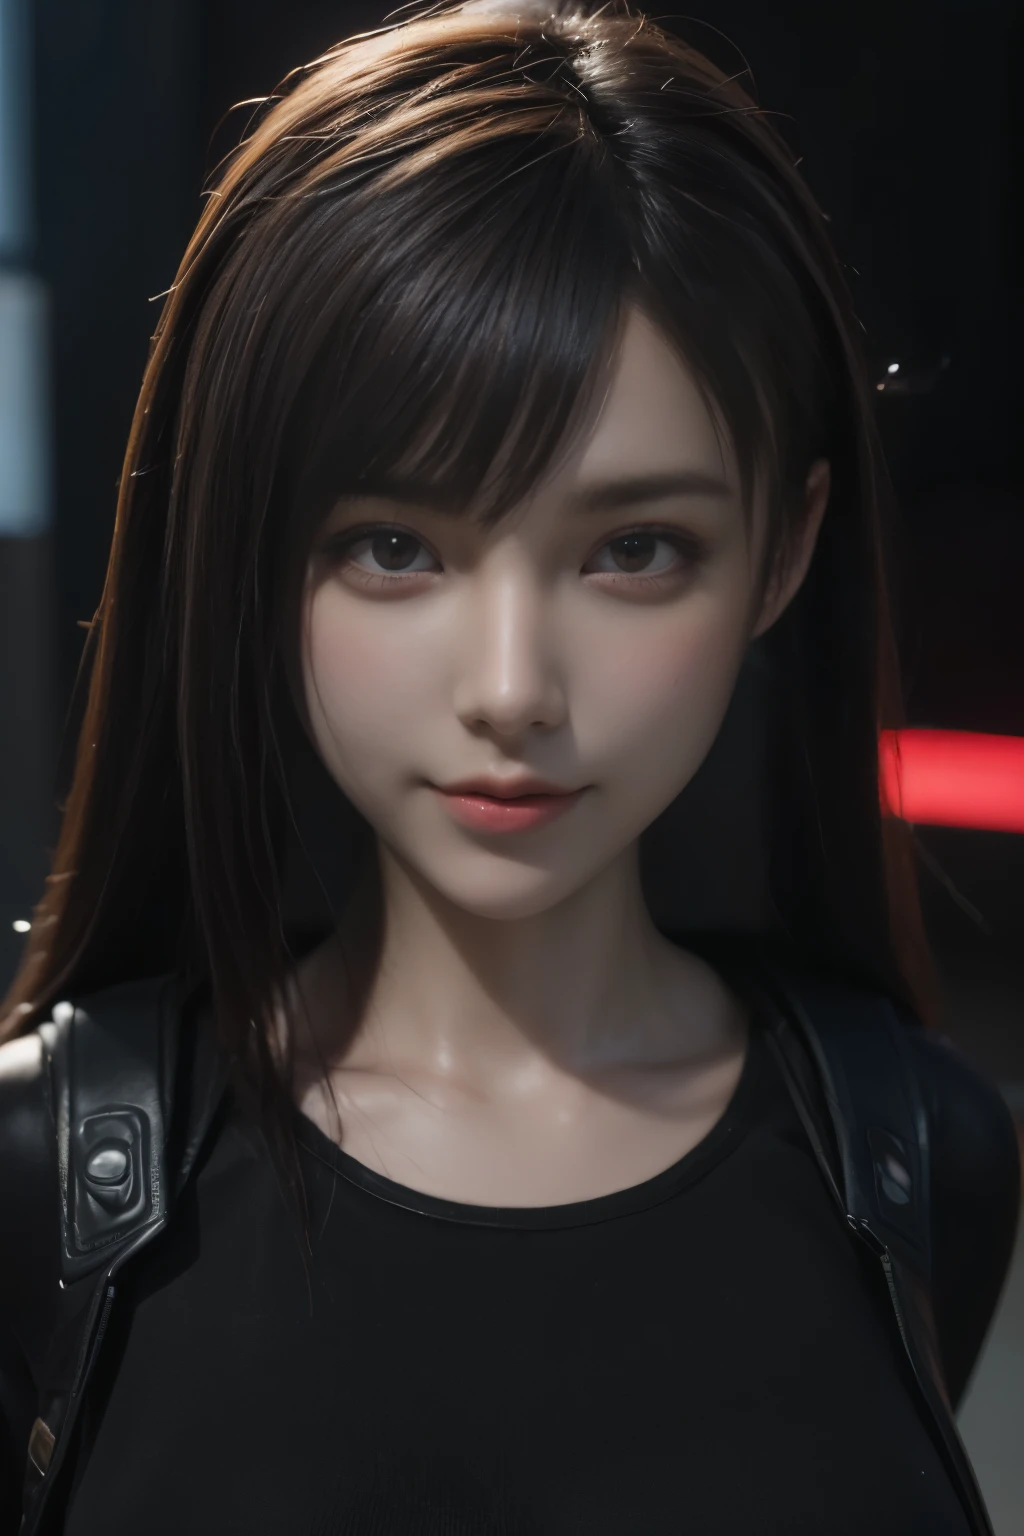 Masterpiece,Game art,The best picture quality,Highest resolution,8K,(A bust photograph),(Portrait),(Head close-up),(Rule of thirds),Unreal Engine 5 rendering works,
20 year old girl,Future World Police,Short hair details,With long bangs,(Short White Hair,Fiery red eyes),(Large, full breasts),(Wearing an unassigned SWAT uniform,police badge,Accessories for police operations),Mouth smile,Elegant and charming,Noble and gentle,(Dynamic posture),A top-down view,The neon city of night,
Movie lights，Ray tracing，Game CG，((3D Unreal Engine))，OC rendering reflection pattern